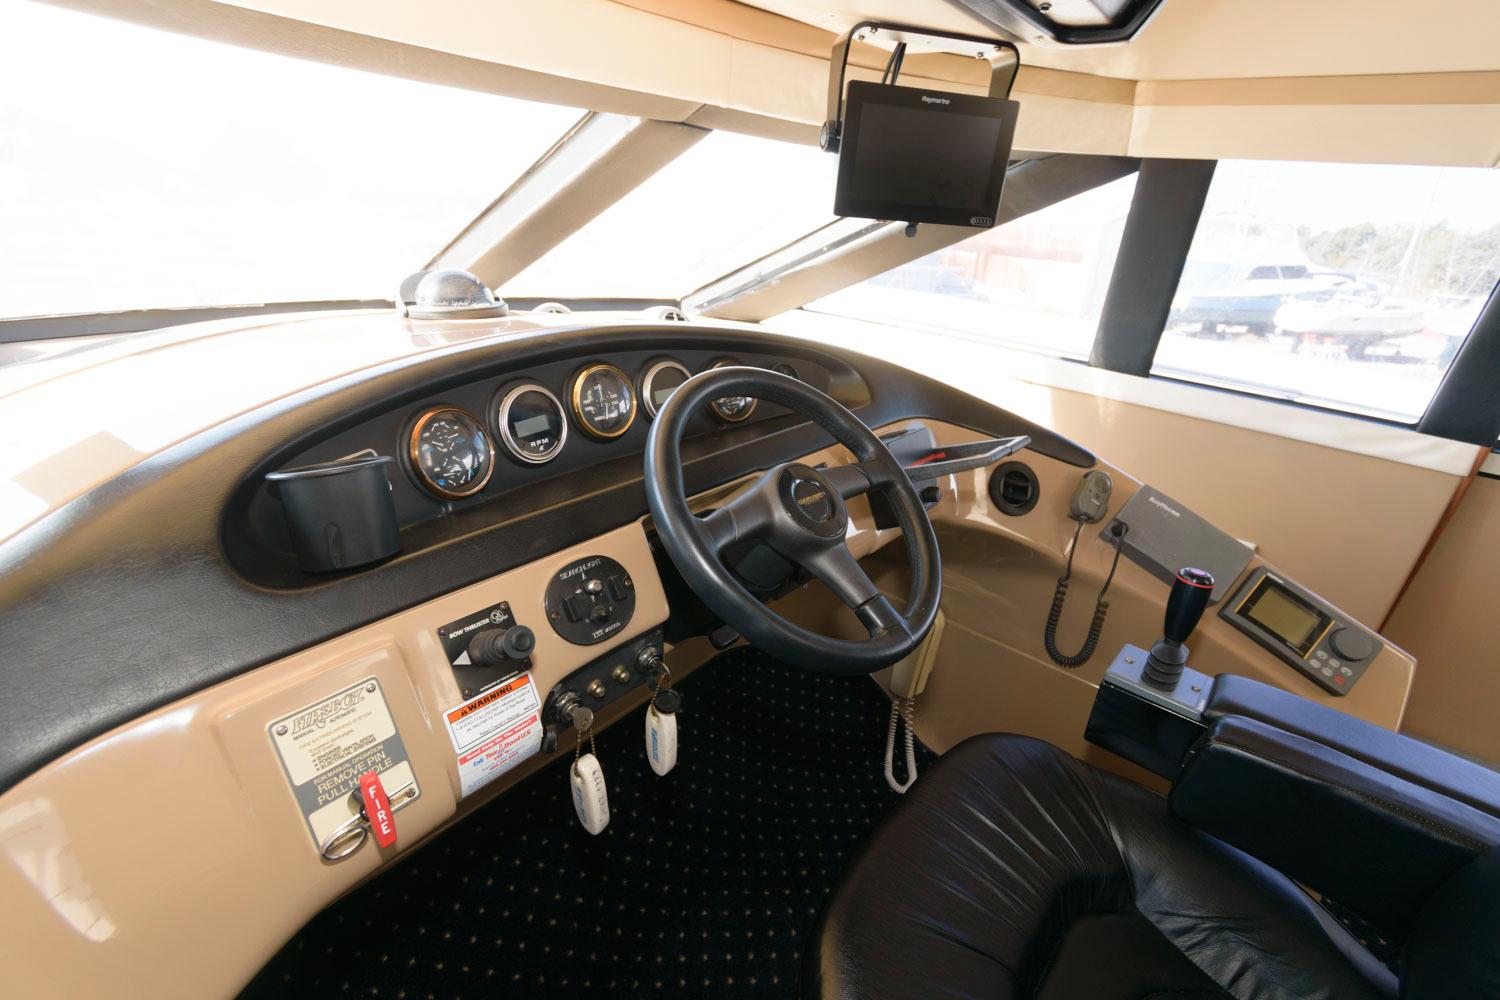 1999 Carver 530 Voyager Pilothouse